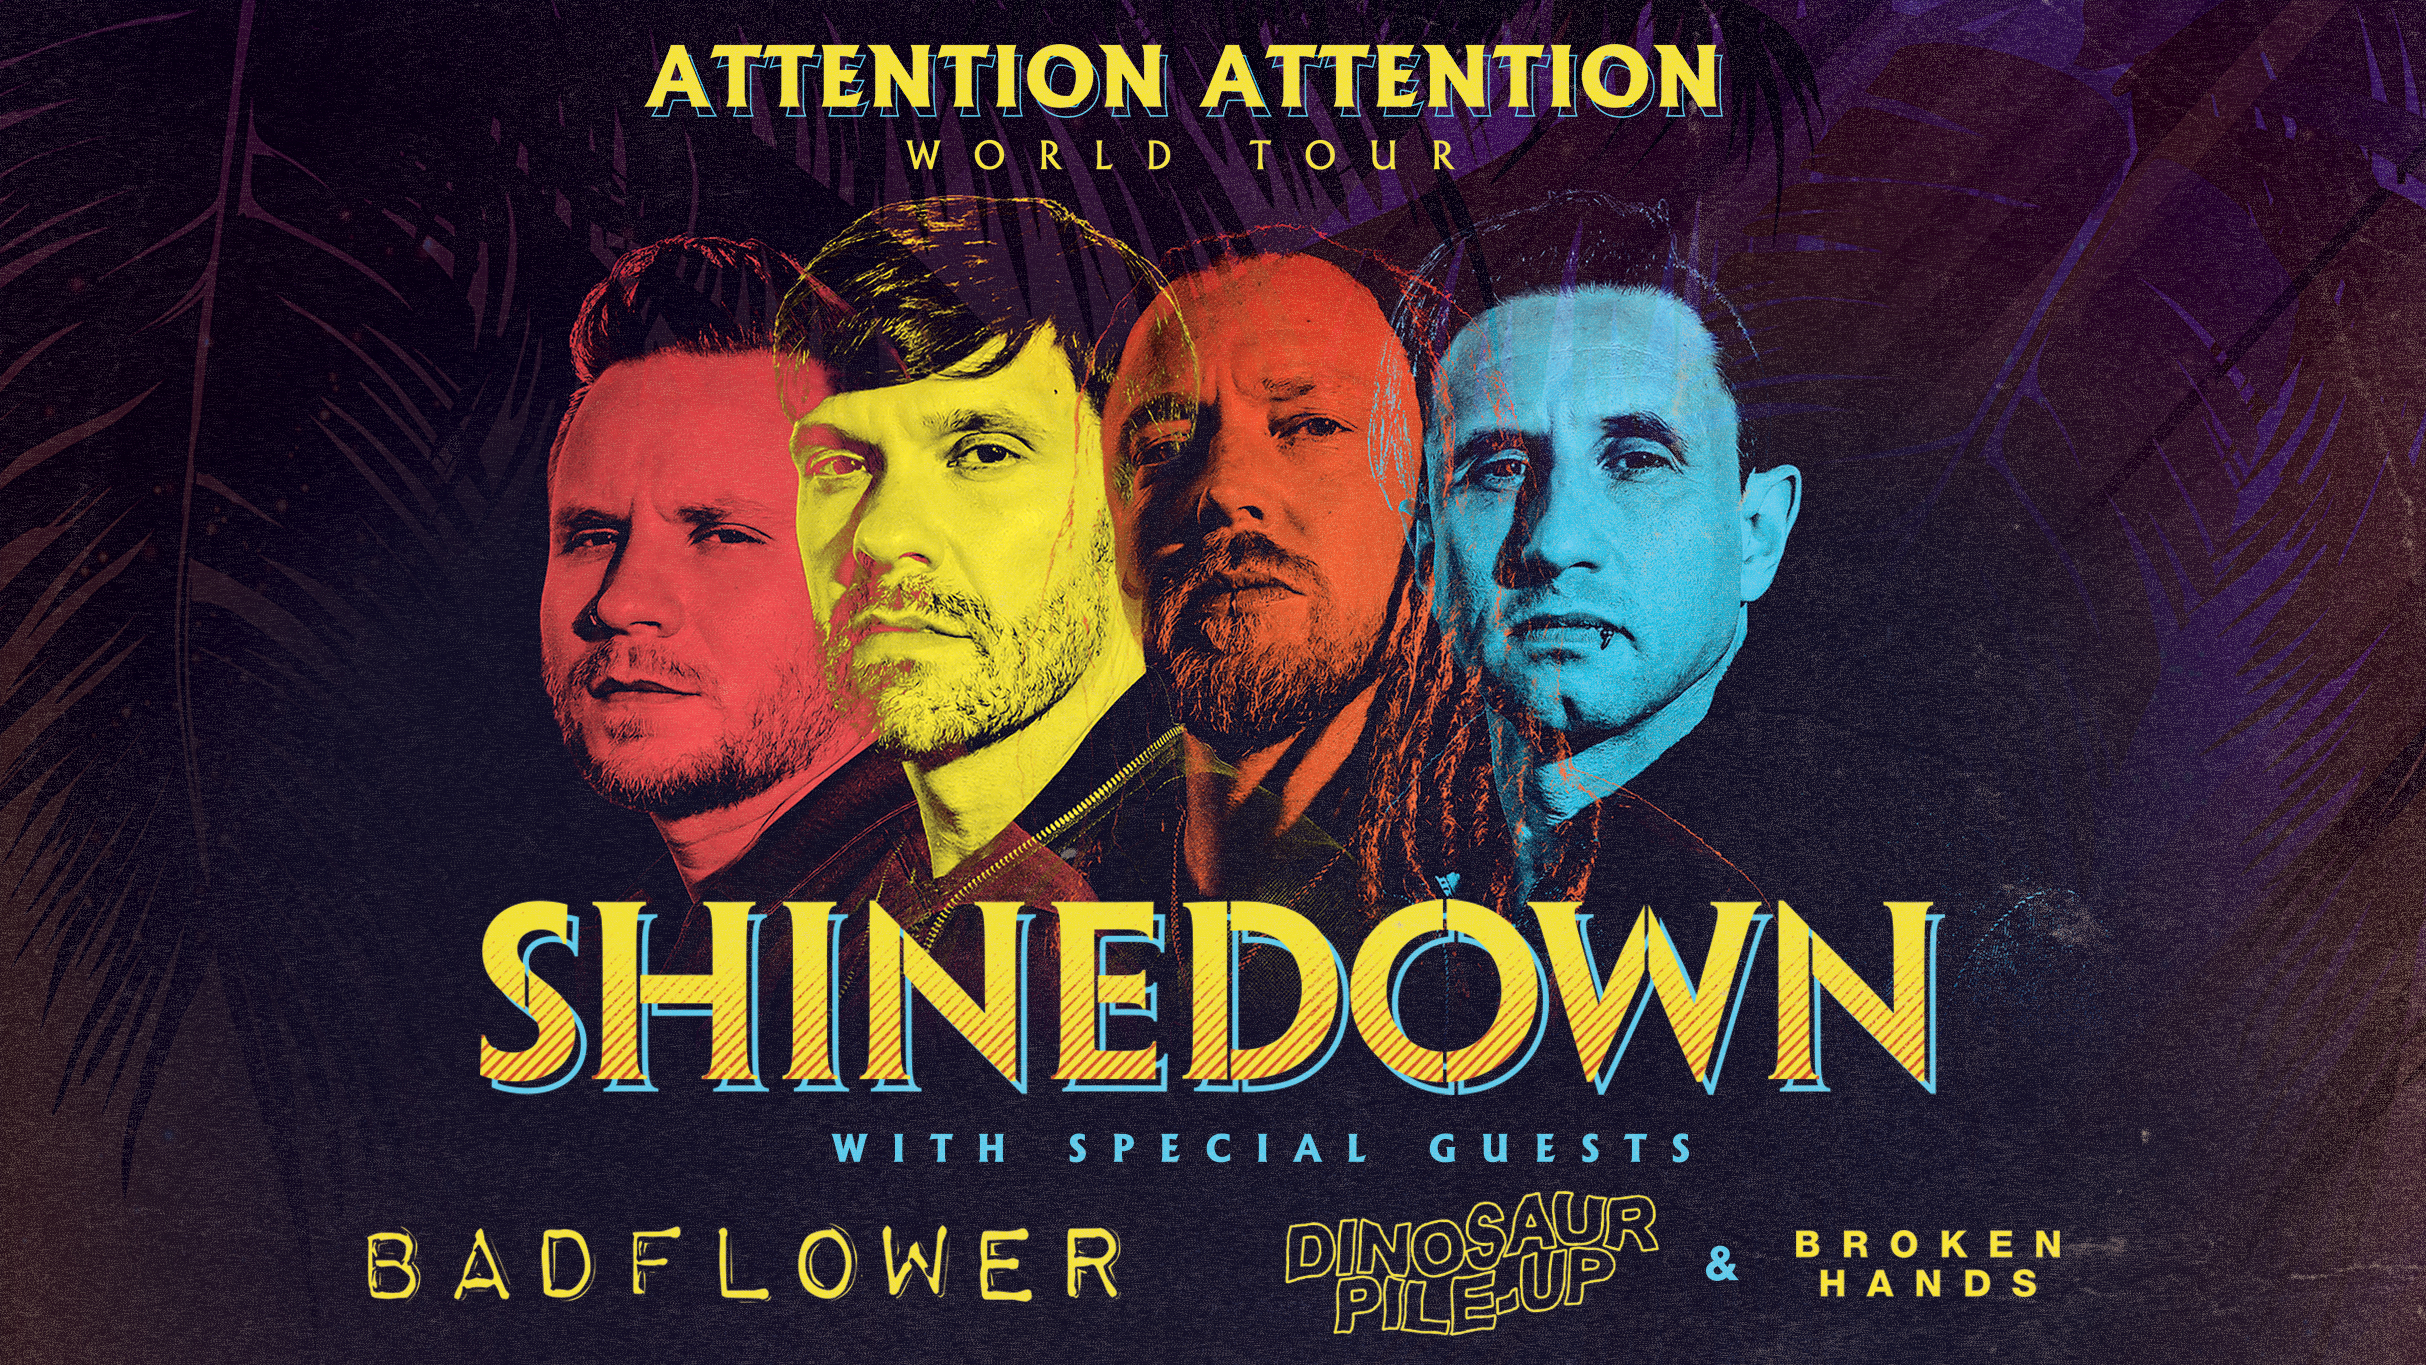 SHINEDOWN: ATTENTION ATTENTION World Tour